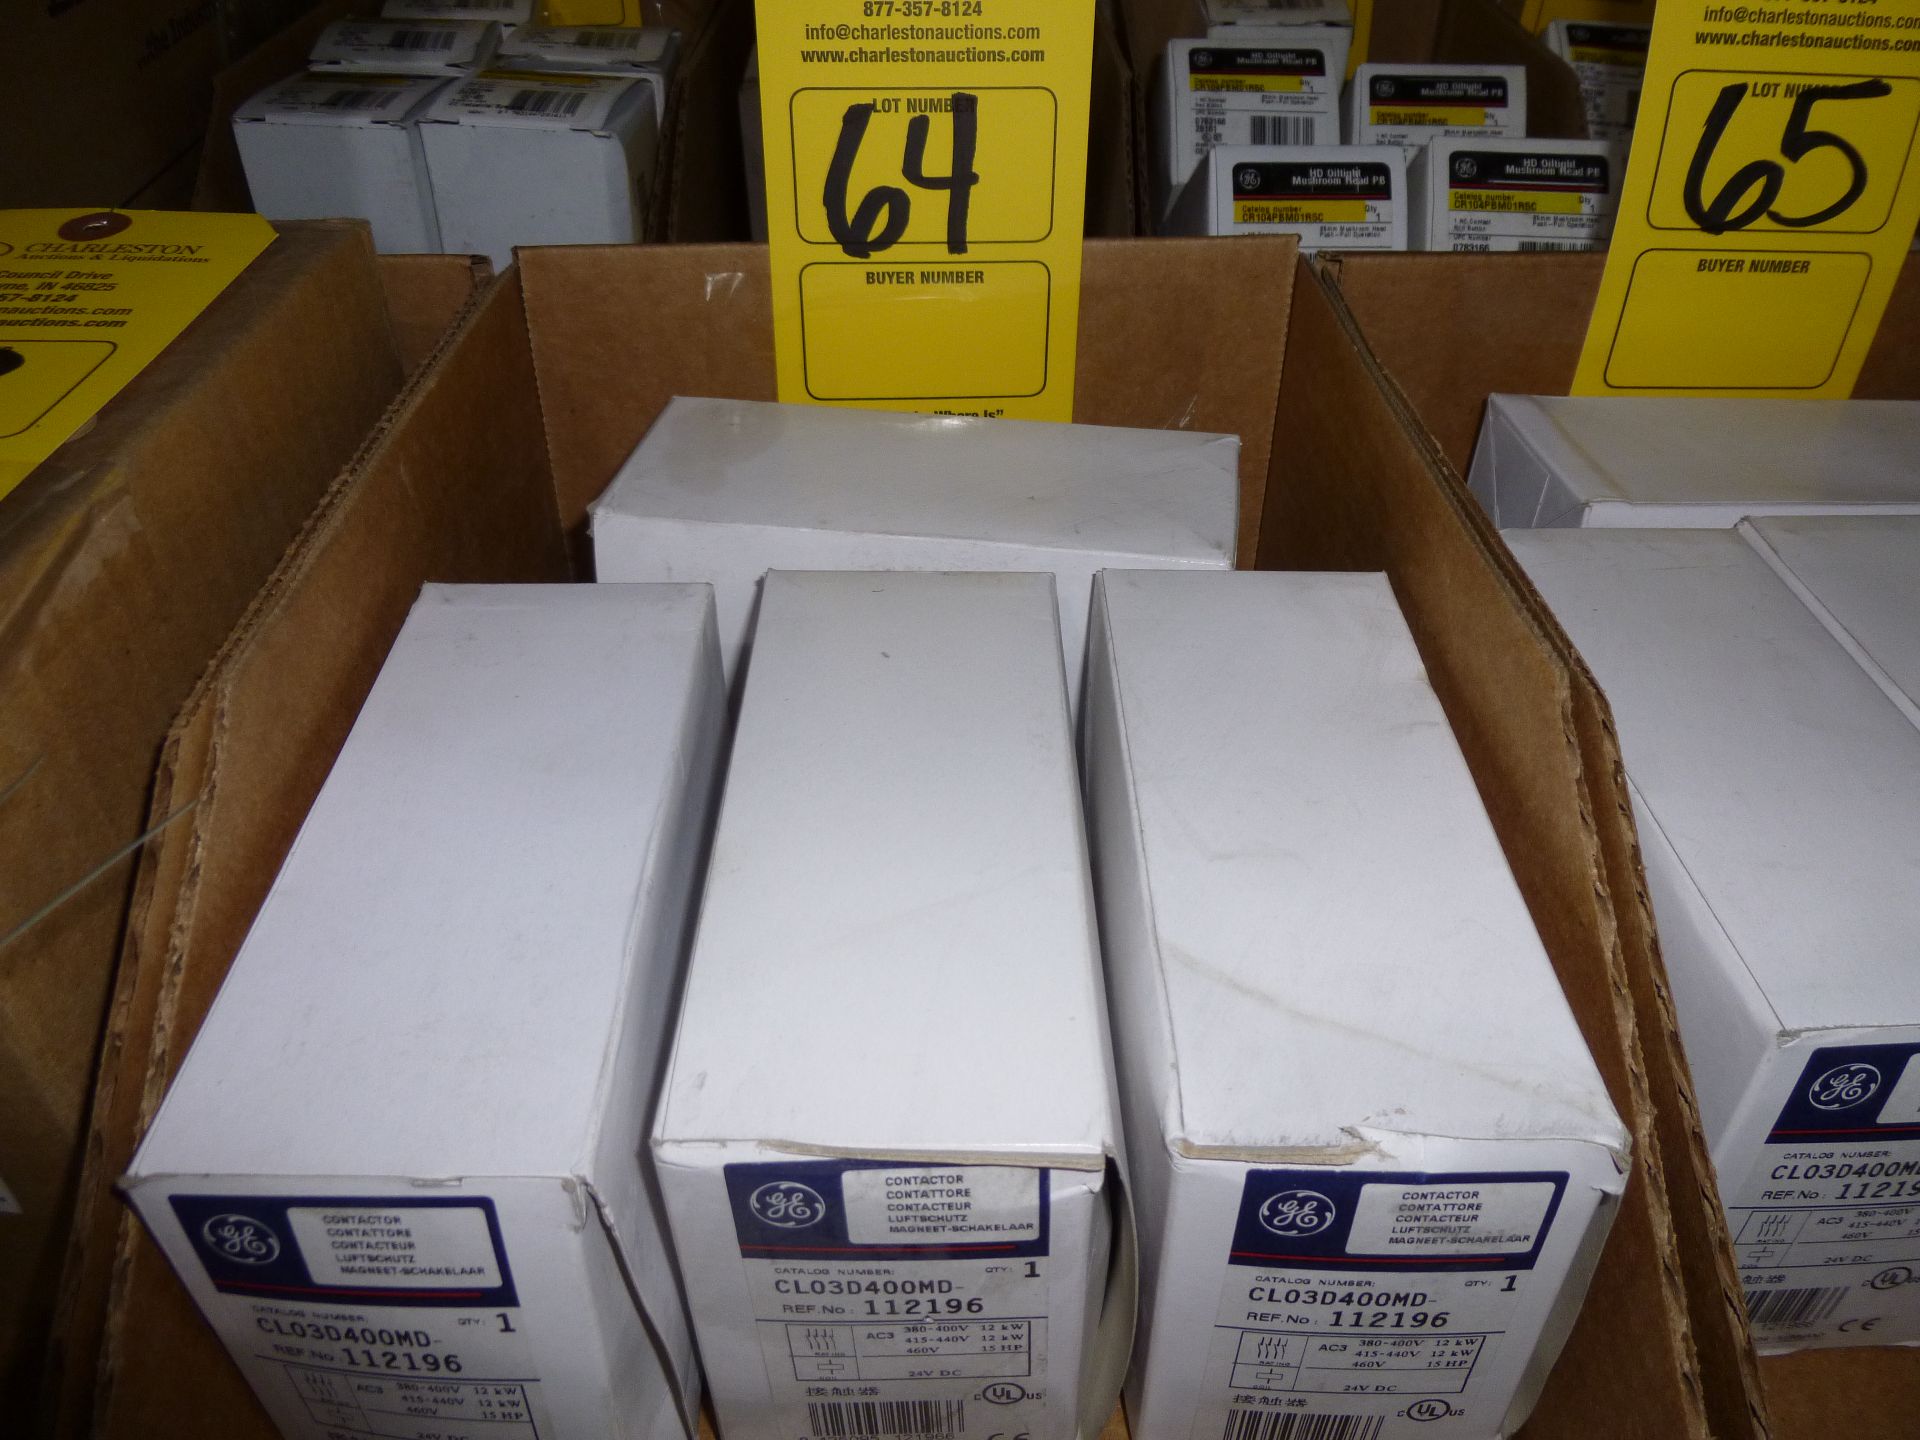 Qty 4 GE contactor Model CL03D400MD, new in boxes, as always with Brolyn LLC auctions, all lots